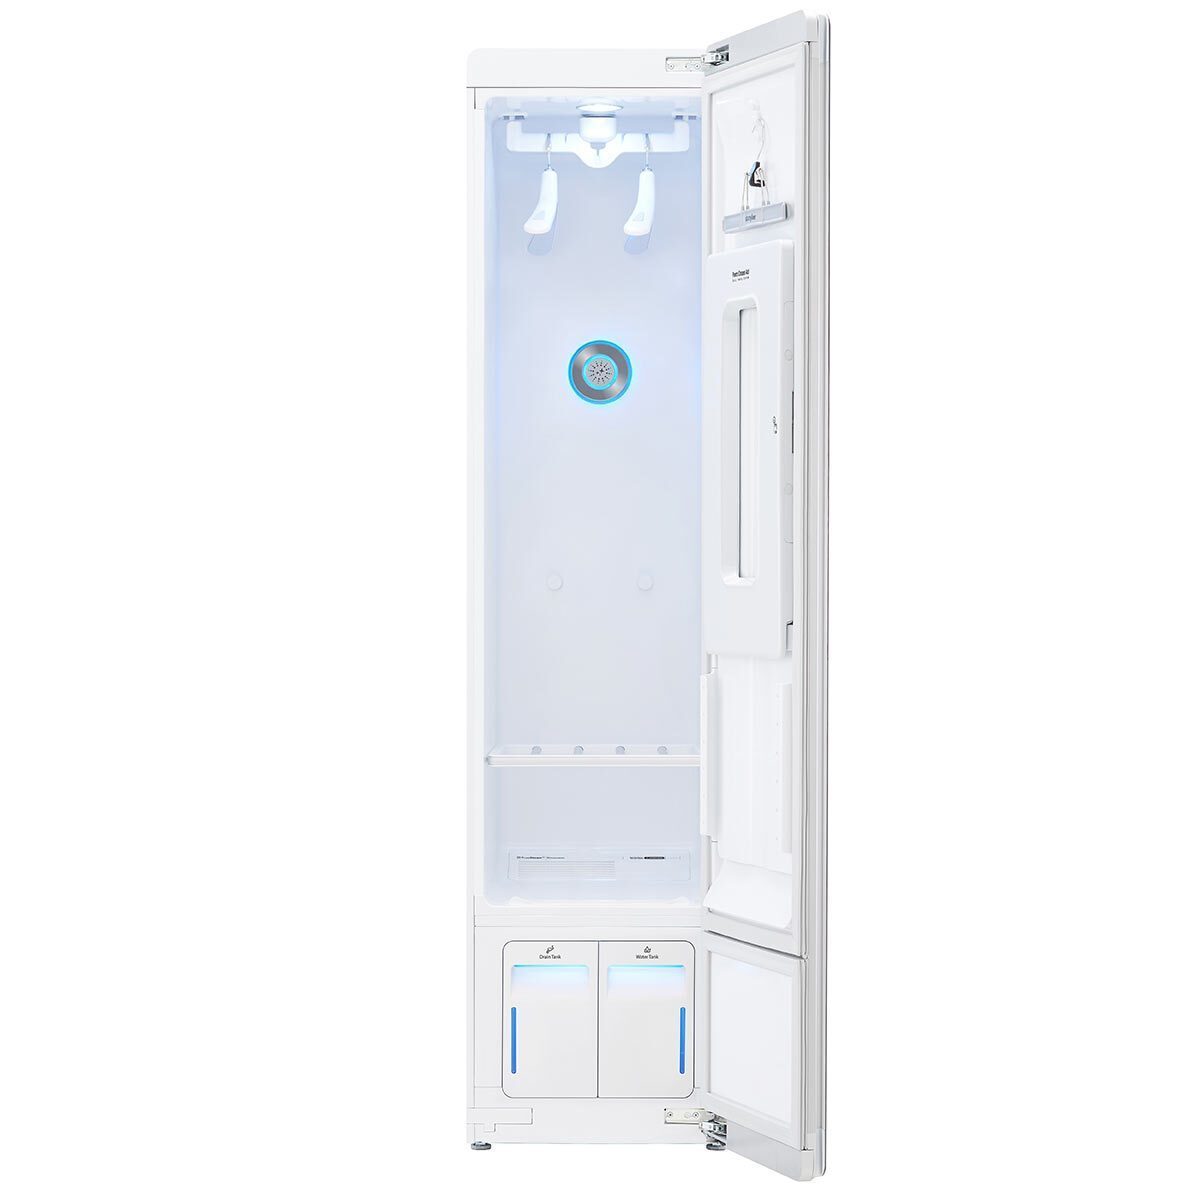 LG S3WF WiFi Connected Styler Steam Clothing Care System® in White - Signature Retail Stores